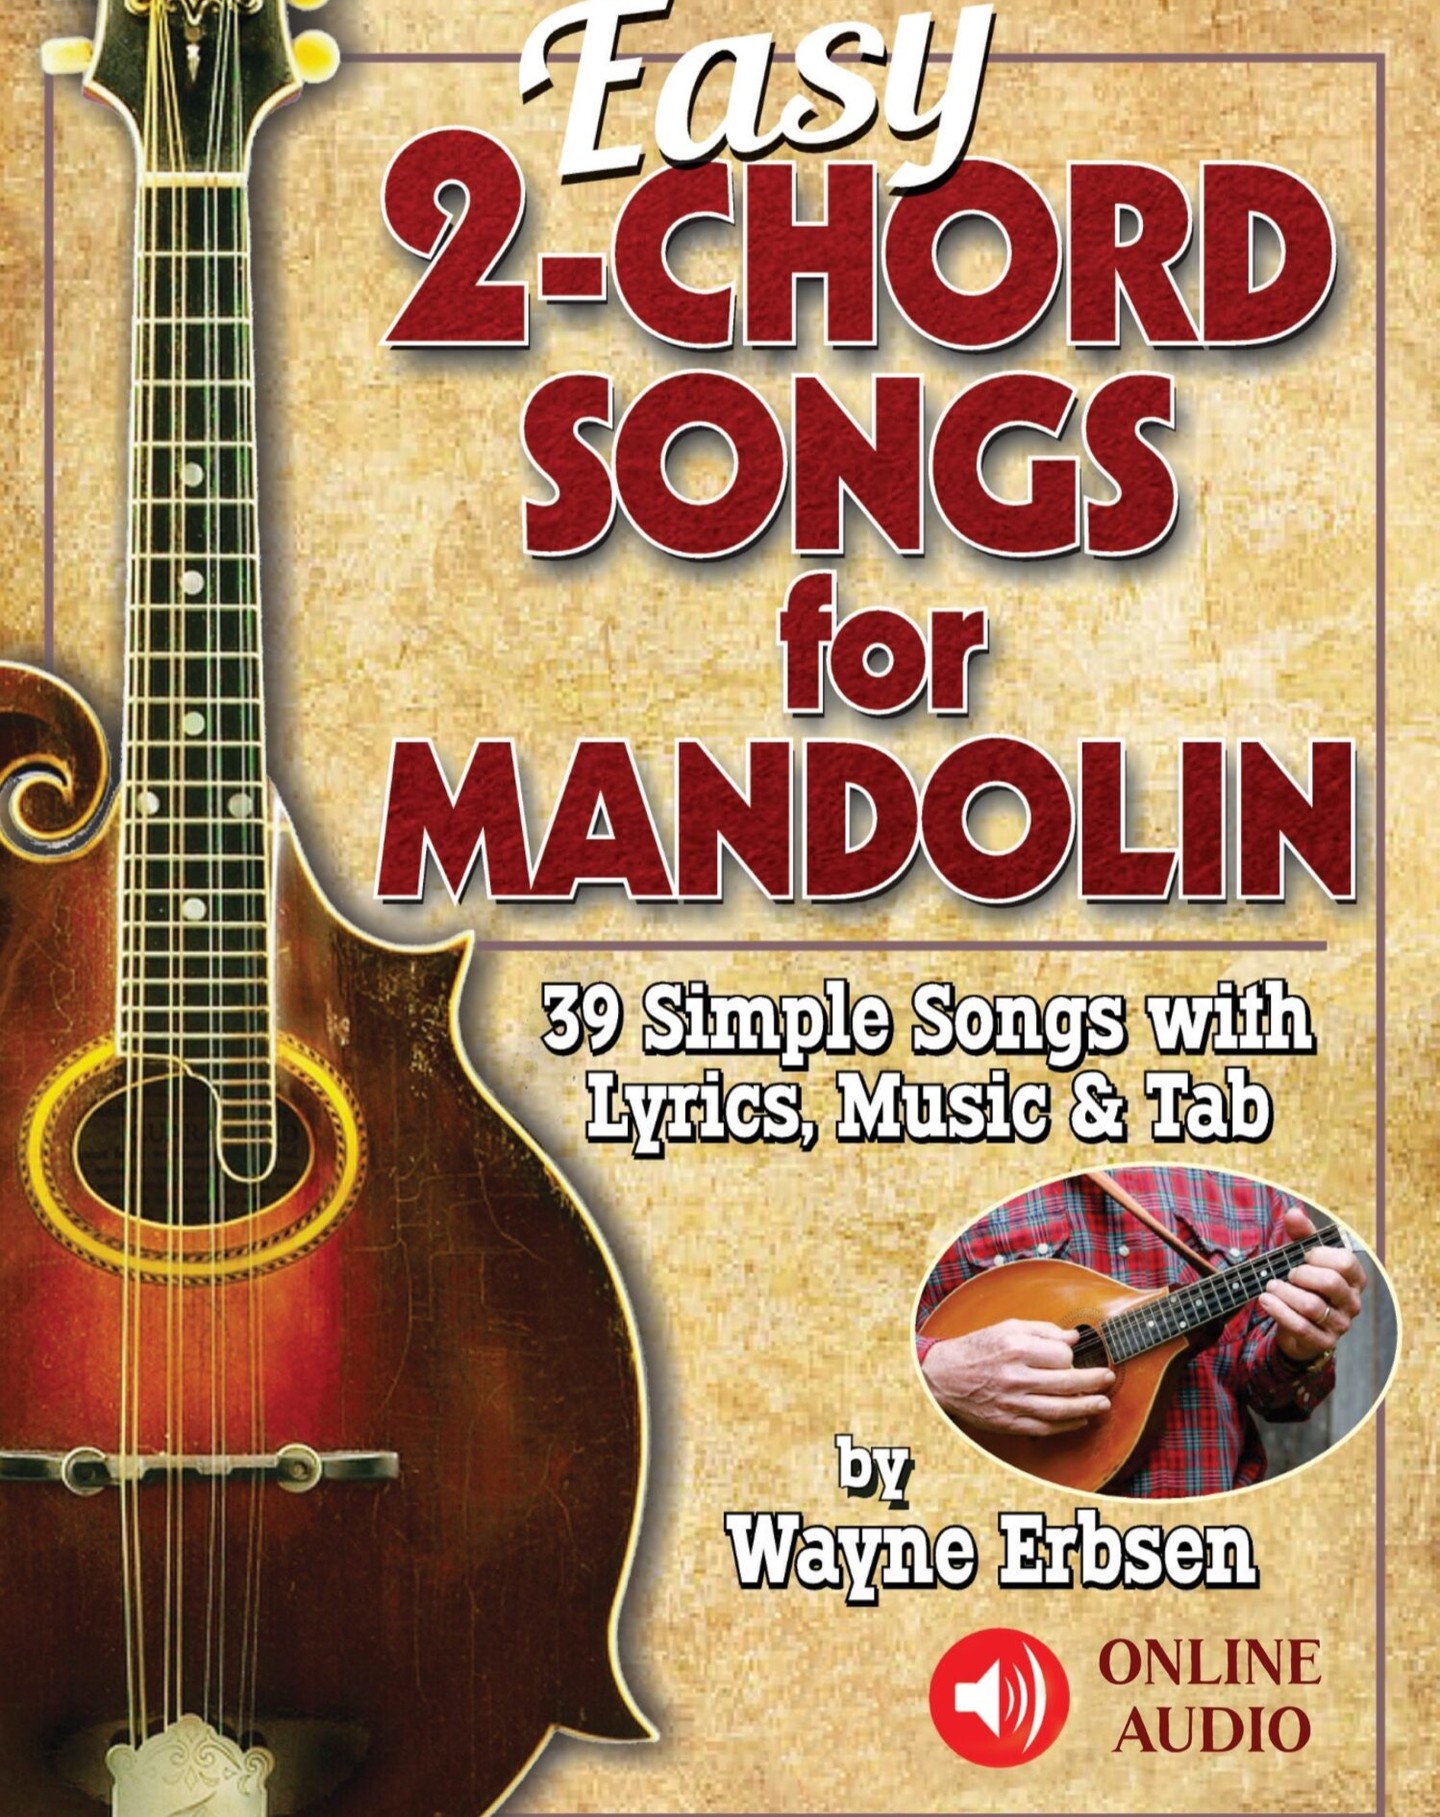 If you want to learn songs on the mandolin but don't know where to start, try "Easy 2-Chord Songs for Mandolin" by Wayne Erbsen!

This accessible book features thirty-nine songs with lyrics, music, and tab and comes with online audio.

Purchase your copy today at the link in our bio!

#linkinbio #nativeground #wayneerbsen #mandolin #mando #bluegrassmusic #bluegrass #oldtime #oldtimemusic #onlineaudio #musicinstruction #2chords #2chordsongs #appalachia #appalachianmusic #mountainmusic @wayneerbsen